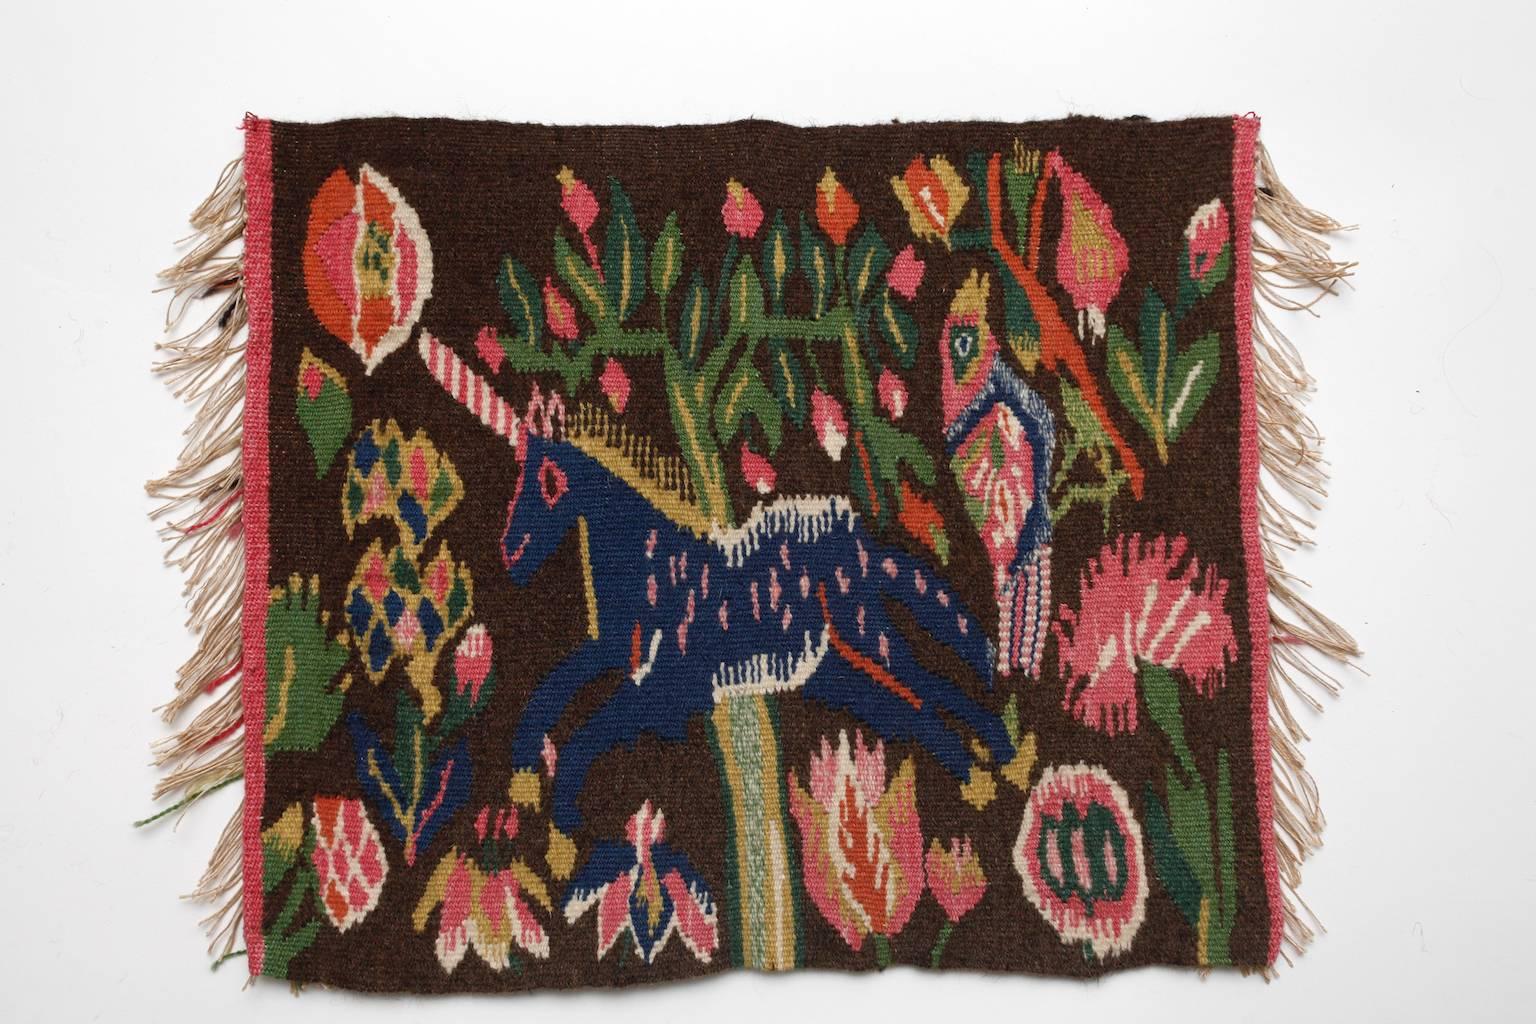 A beautiful small handwoven Swedish wool and linen tapestry from the province Skåne in south of Sweden. probably made during the late 19th or early 20th century.
The main motif is a unicorn in a garden with flowers like Tulips, carnations, etc and